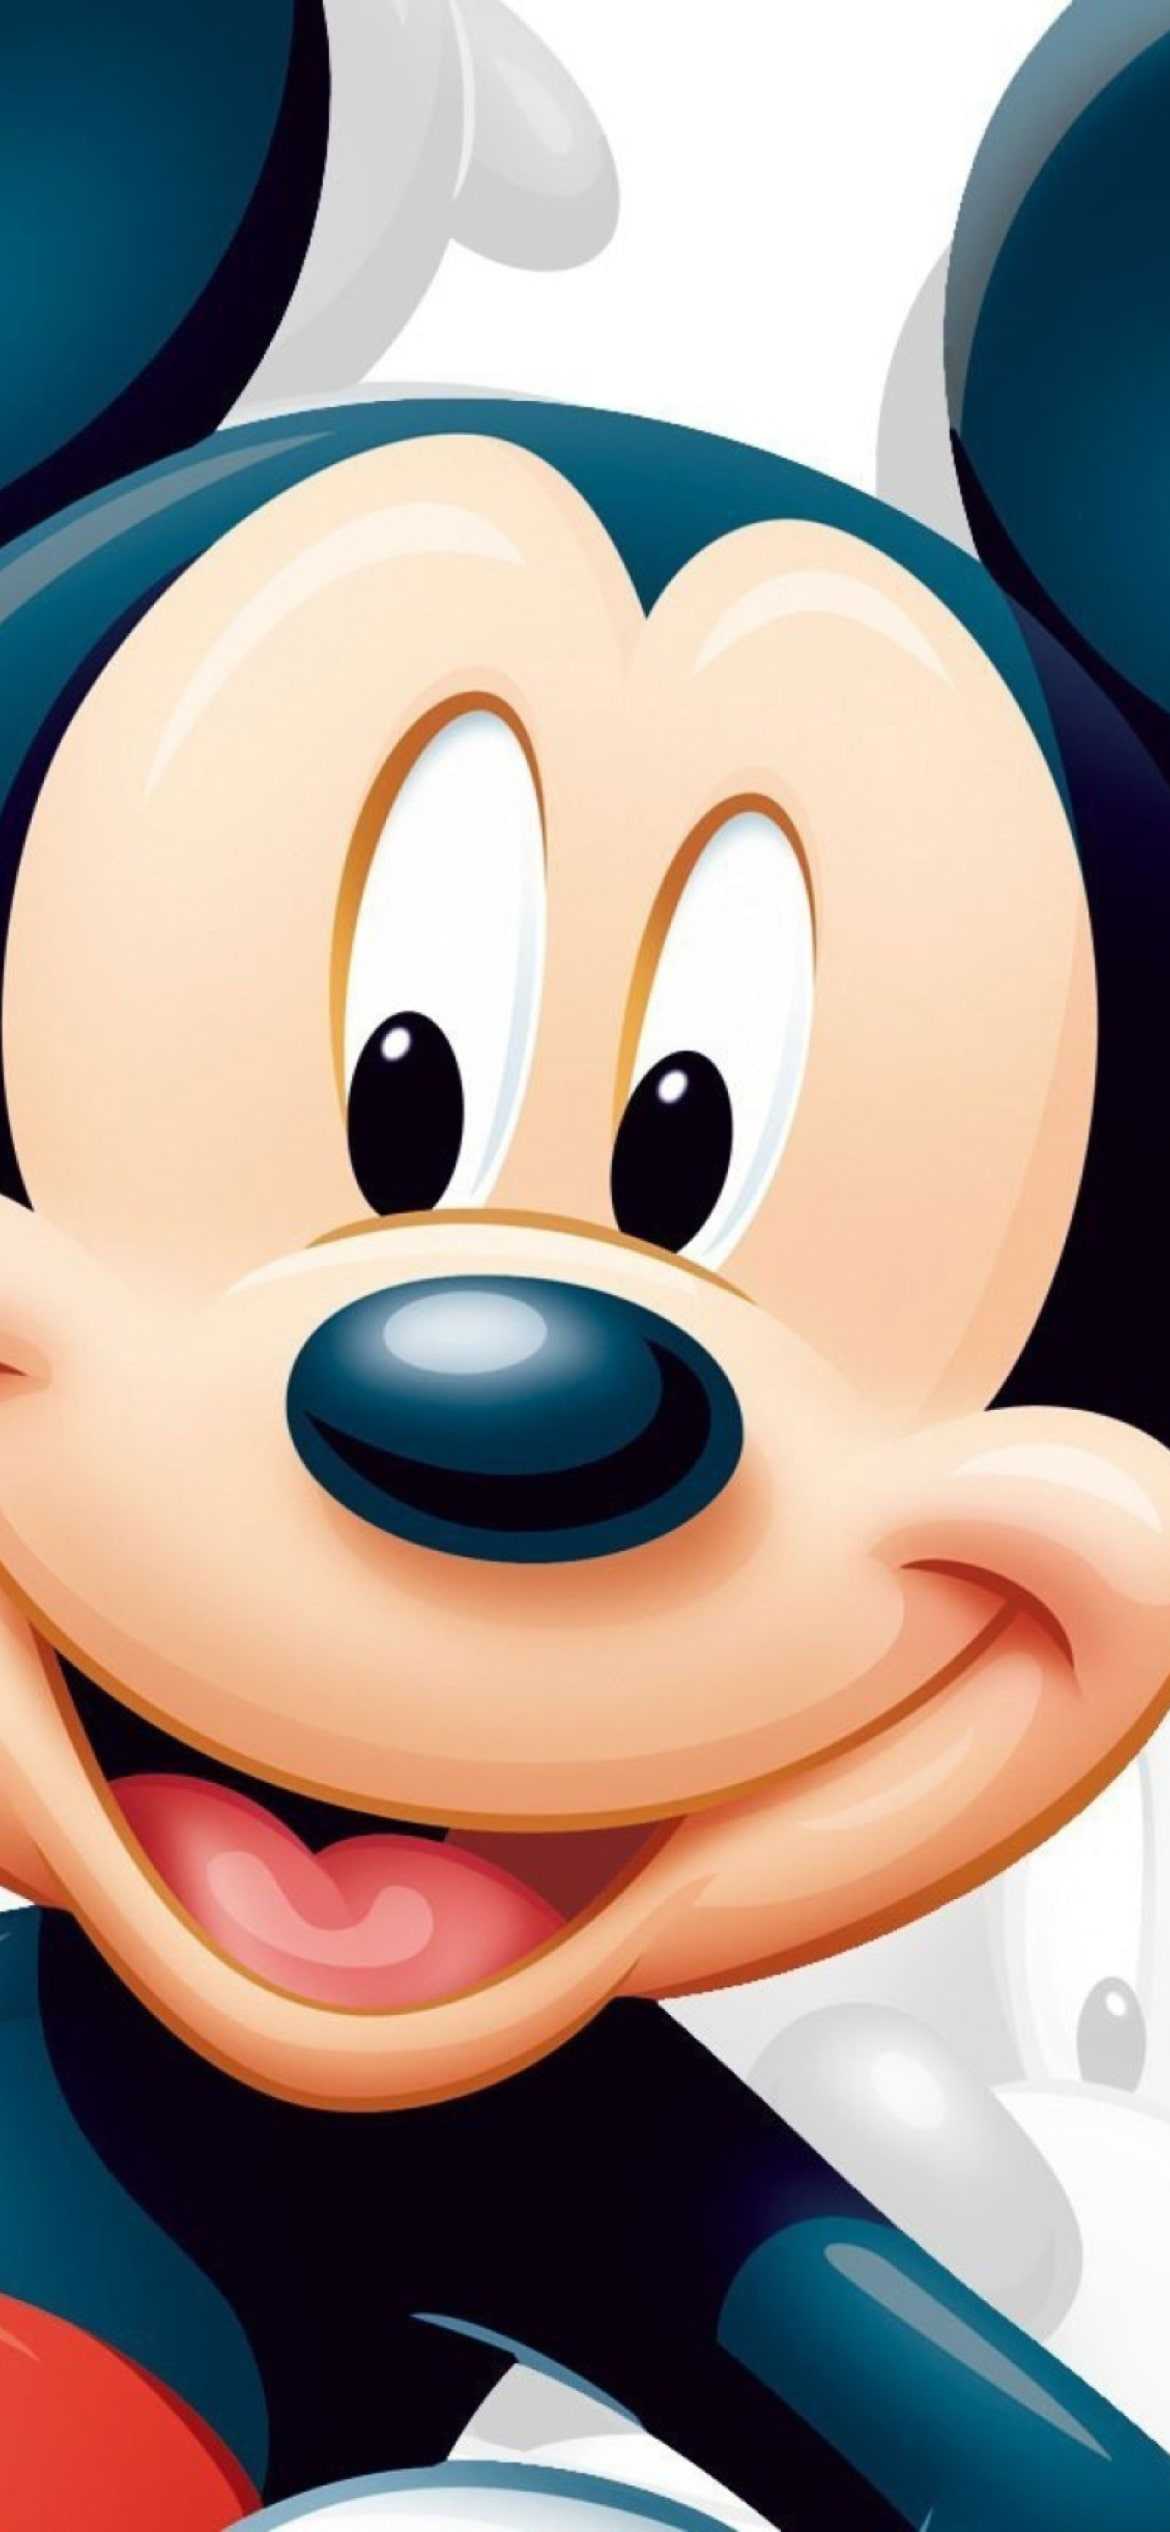 Details wallpaper mickey mouse image super hot